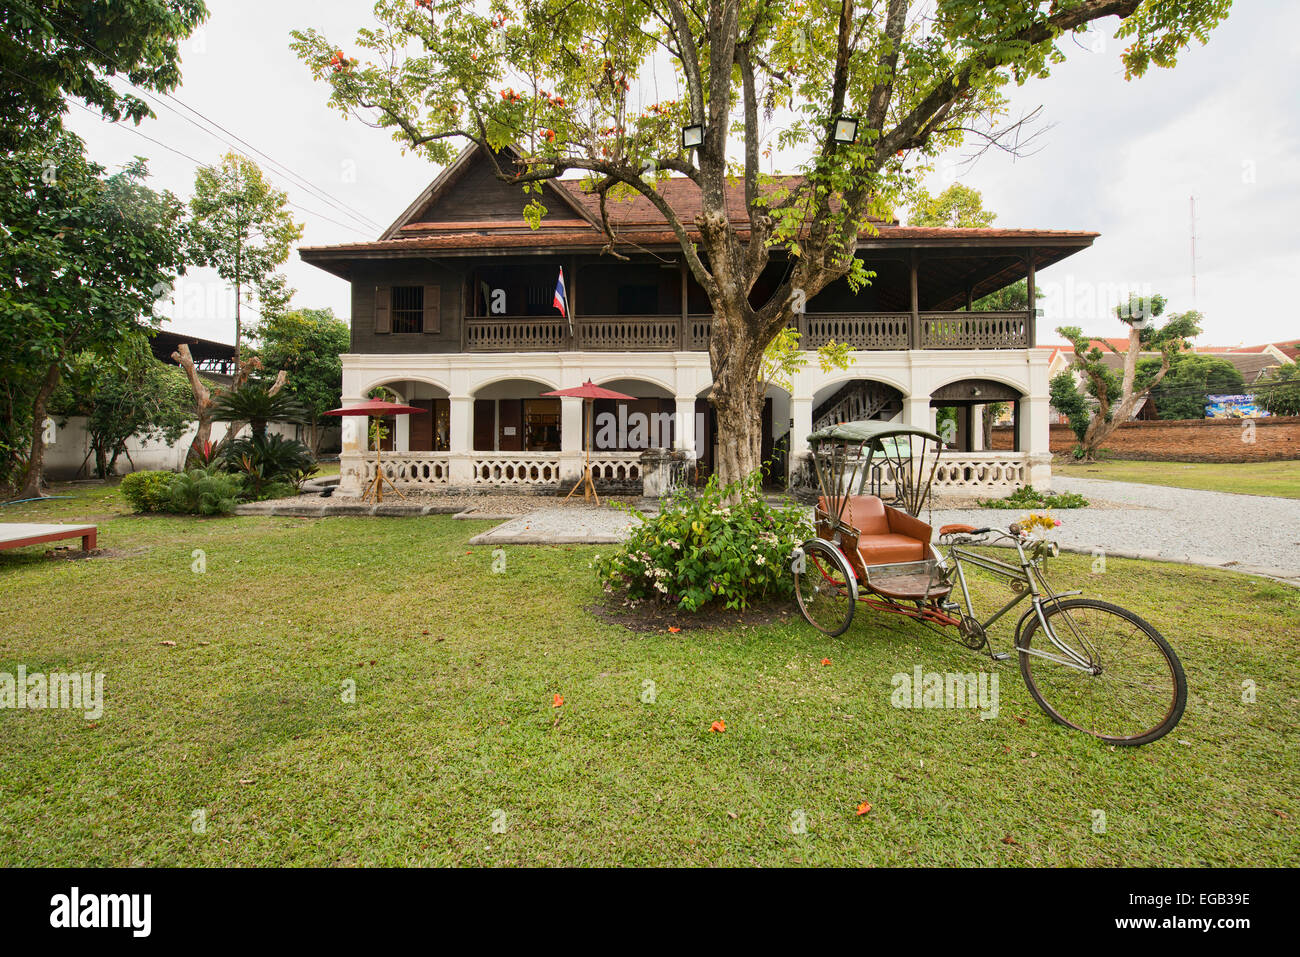 Traditional Lanna style architecture, Chiang Mai, Thailand Stock Photo